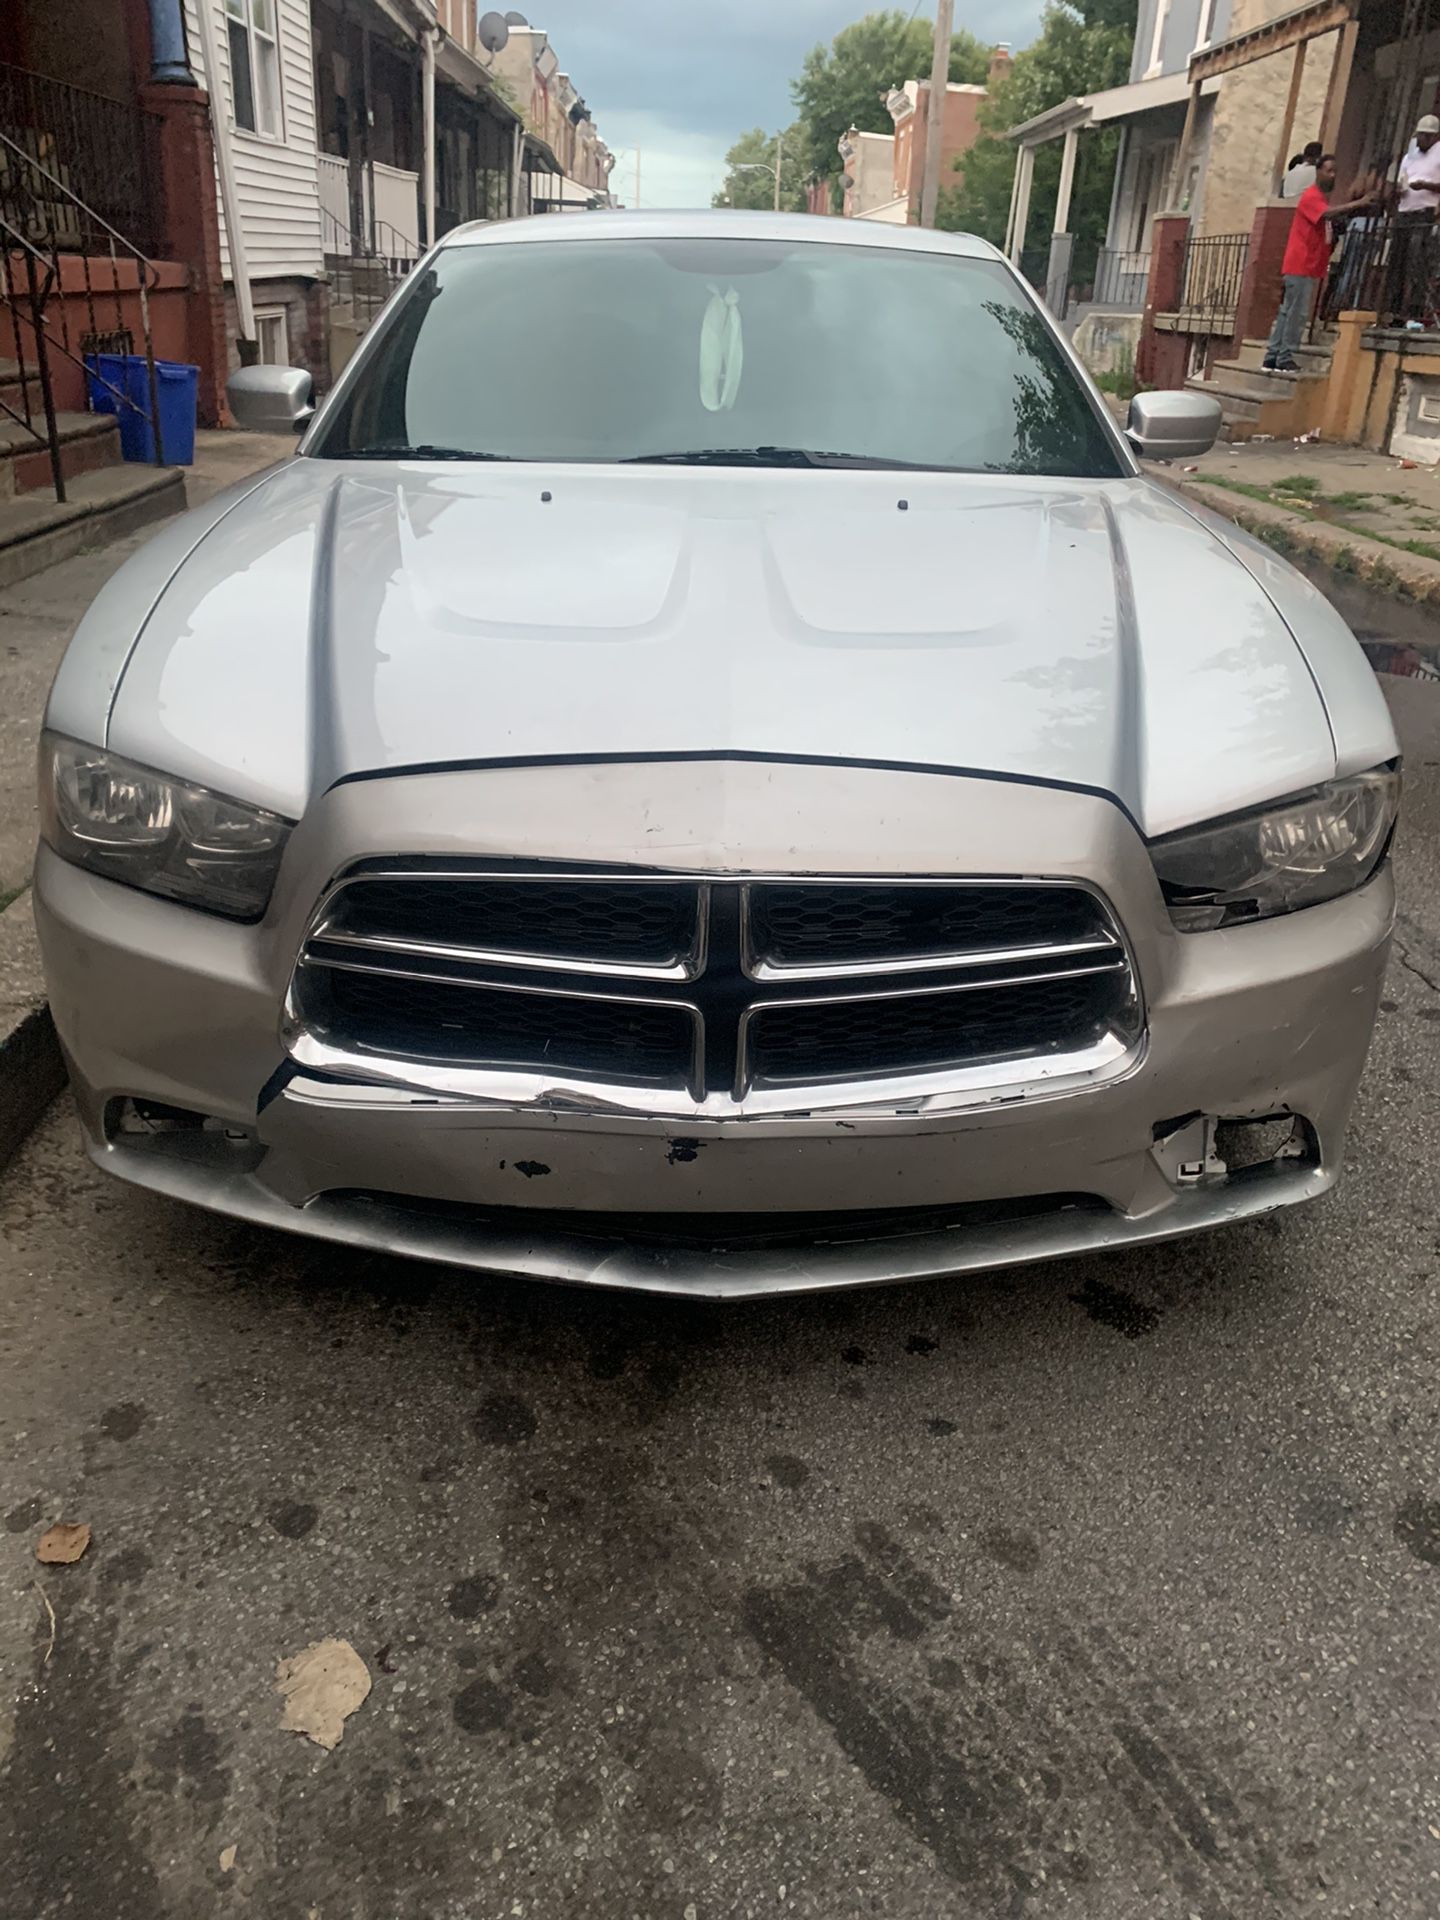 DODGE CHARGER SE ( DIABLO TUNED & COLD AIR I TAKE INCLUDED)